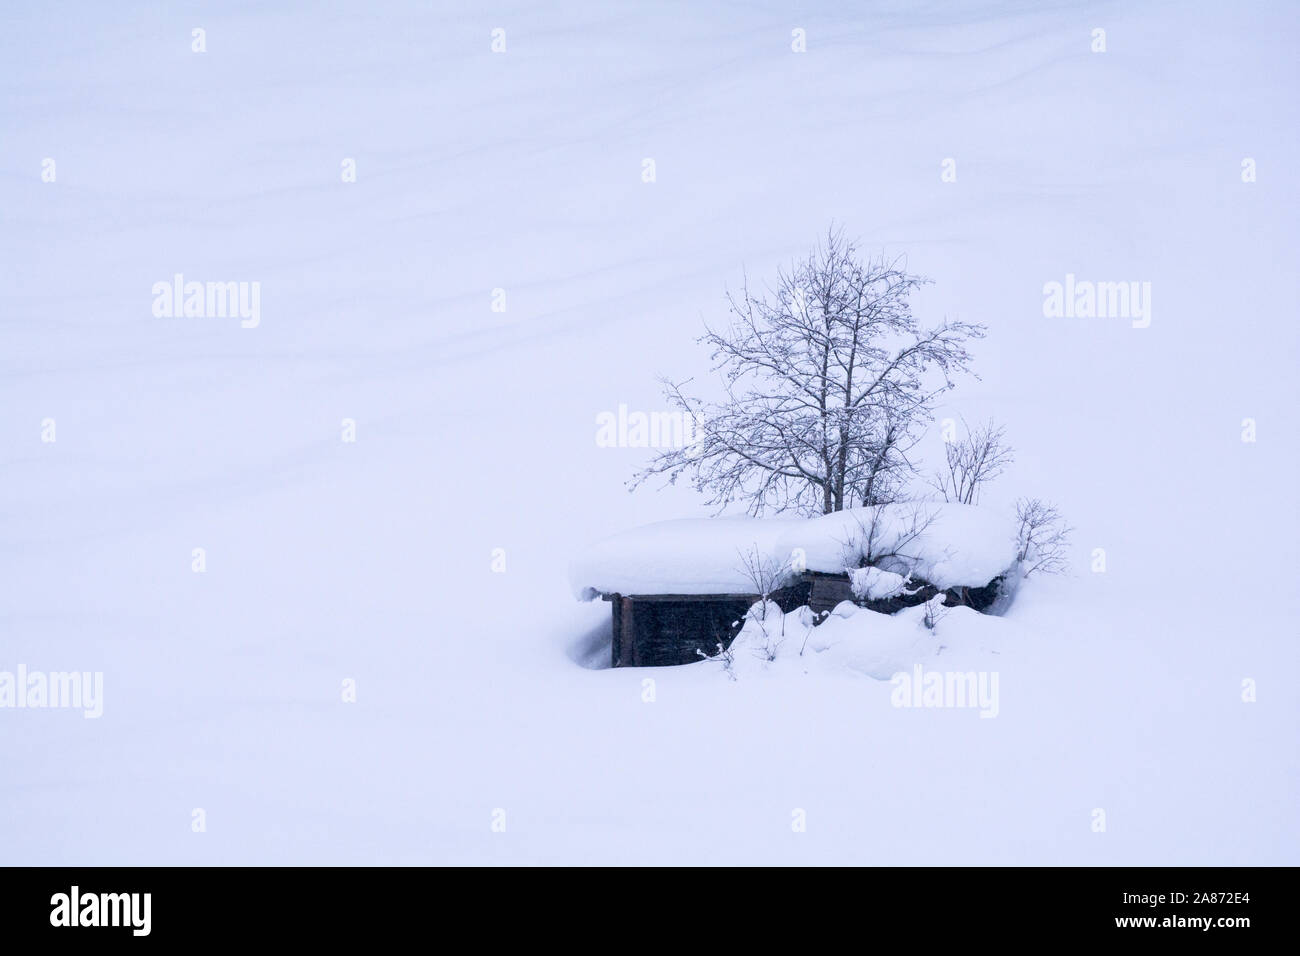 Isolated Wooden hut in winter time.Kaunertal valley in Tyrol, in the Austrian Alps. Massive snow falls are covering this area in winter. Stock Photo